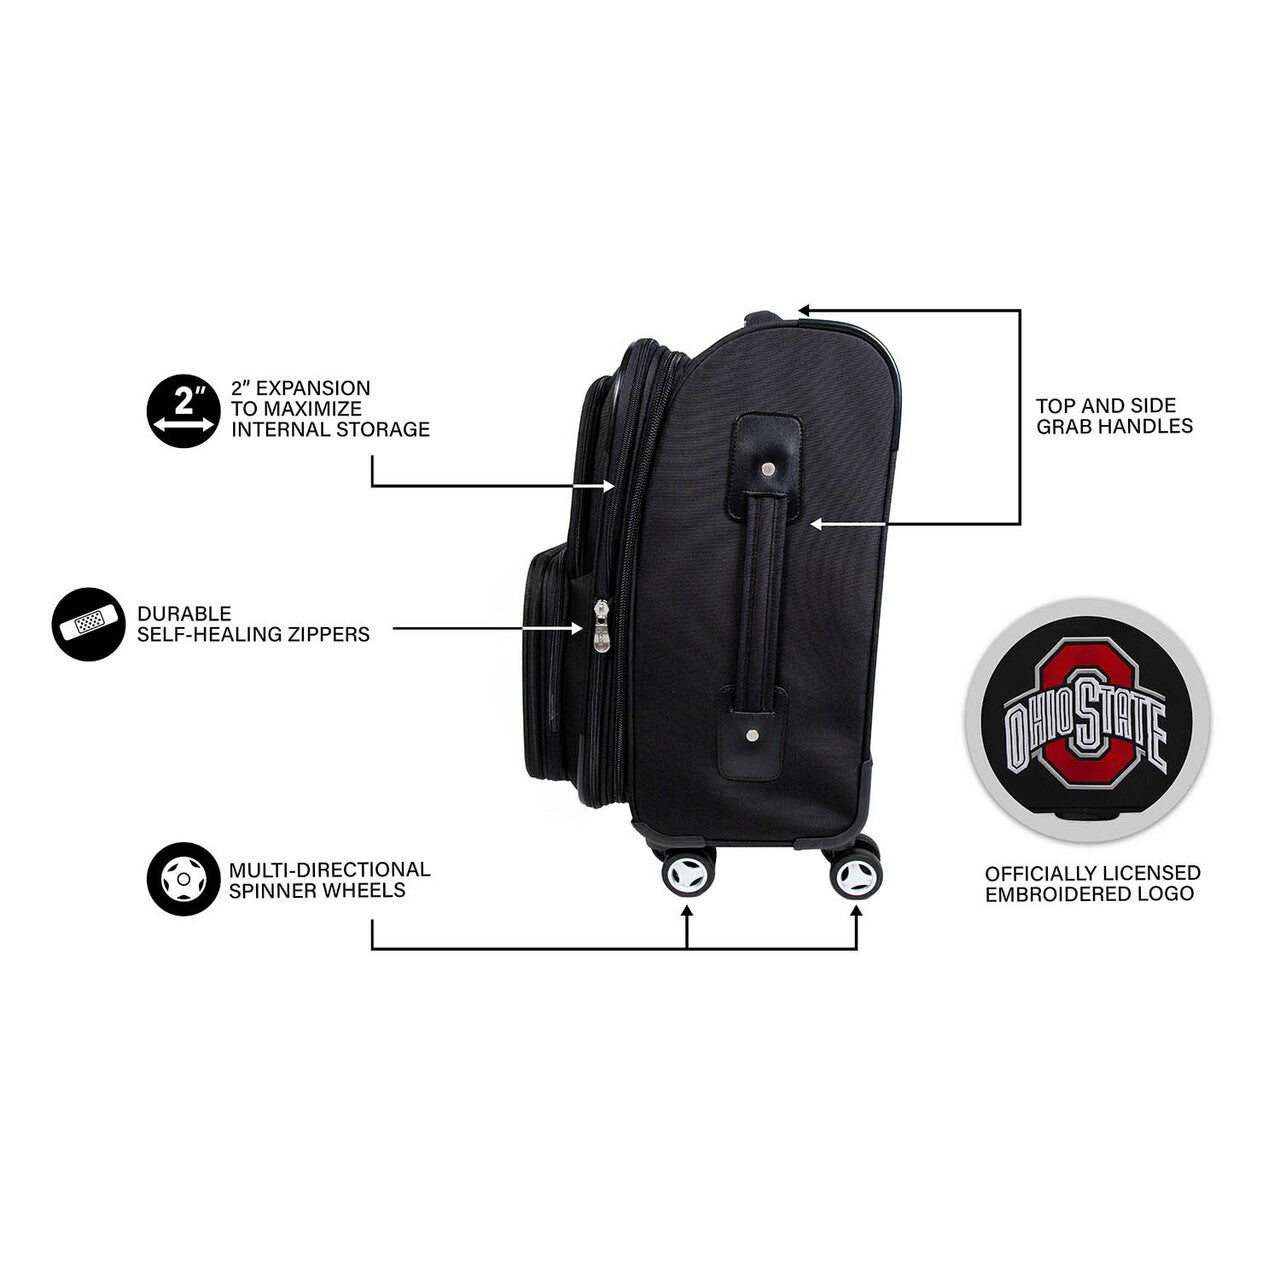 Golden State Warriors 20" Carry-on Spinner Luggage